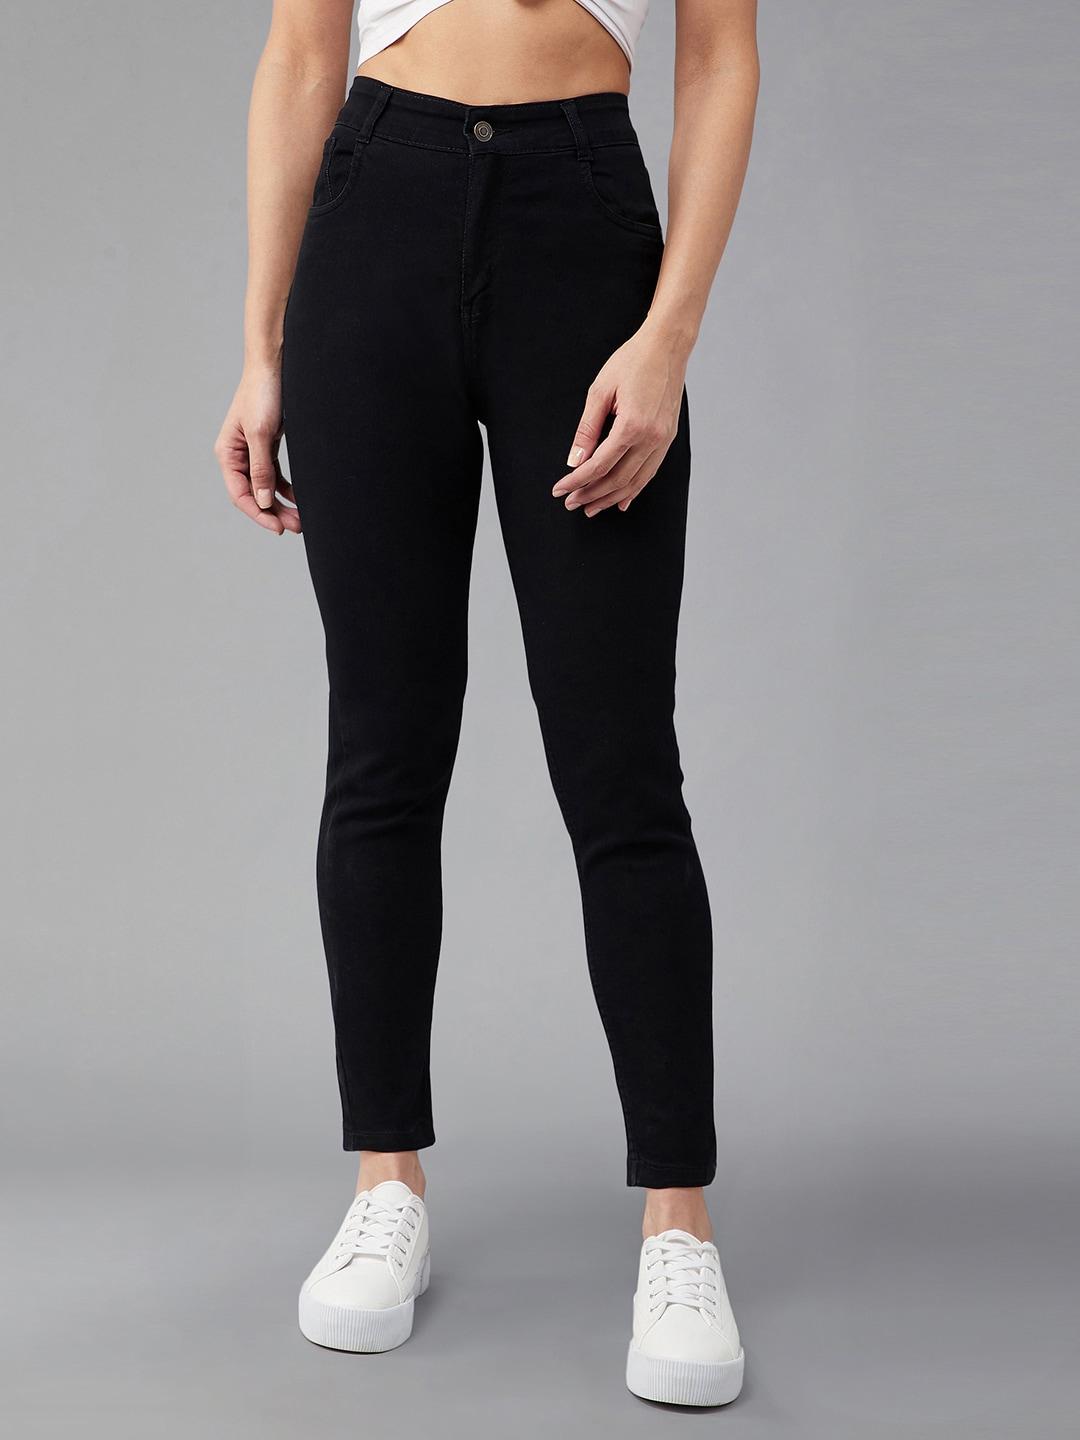 dolce-crudo-women-black-skinny-fit-high-rise-stretchable-jeans